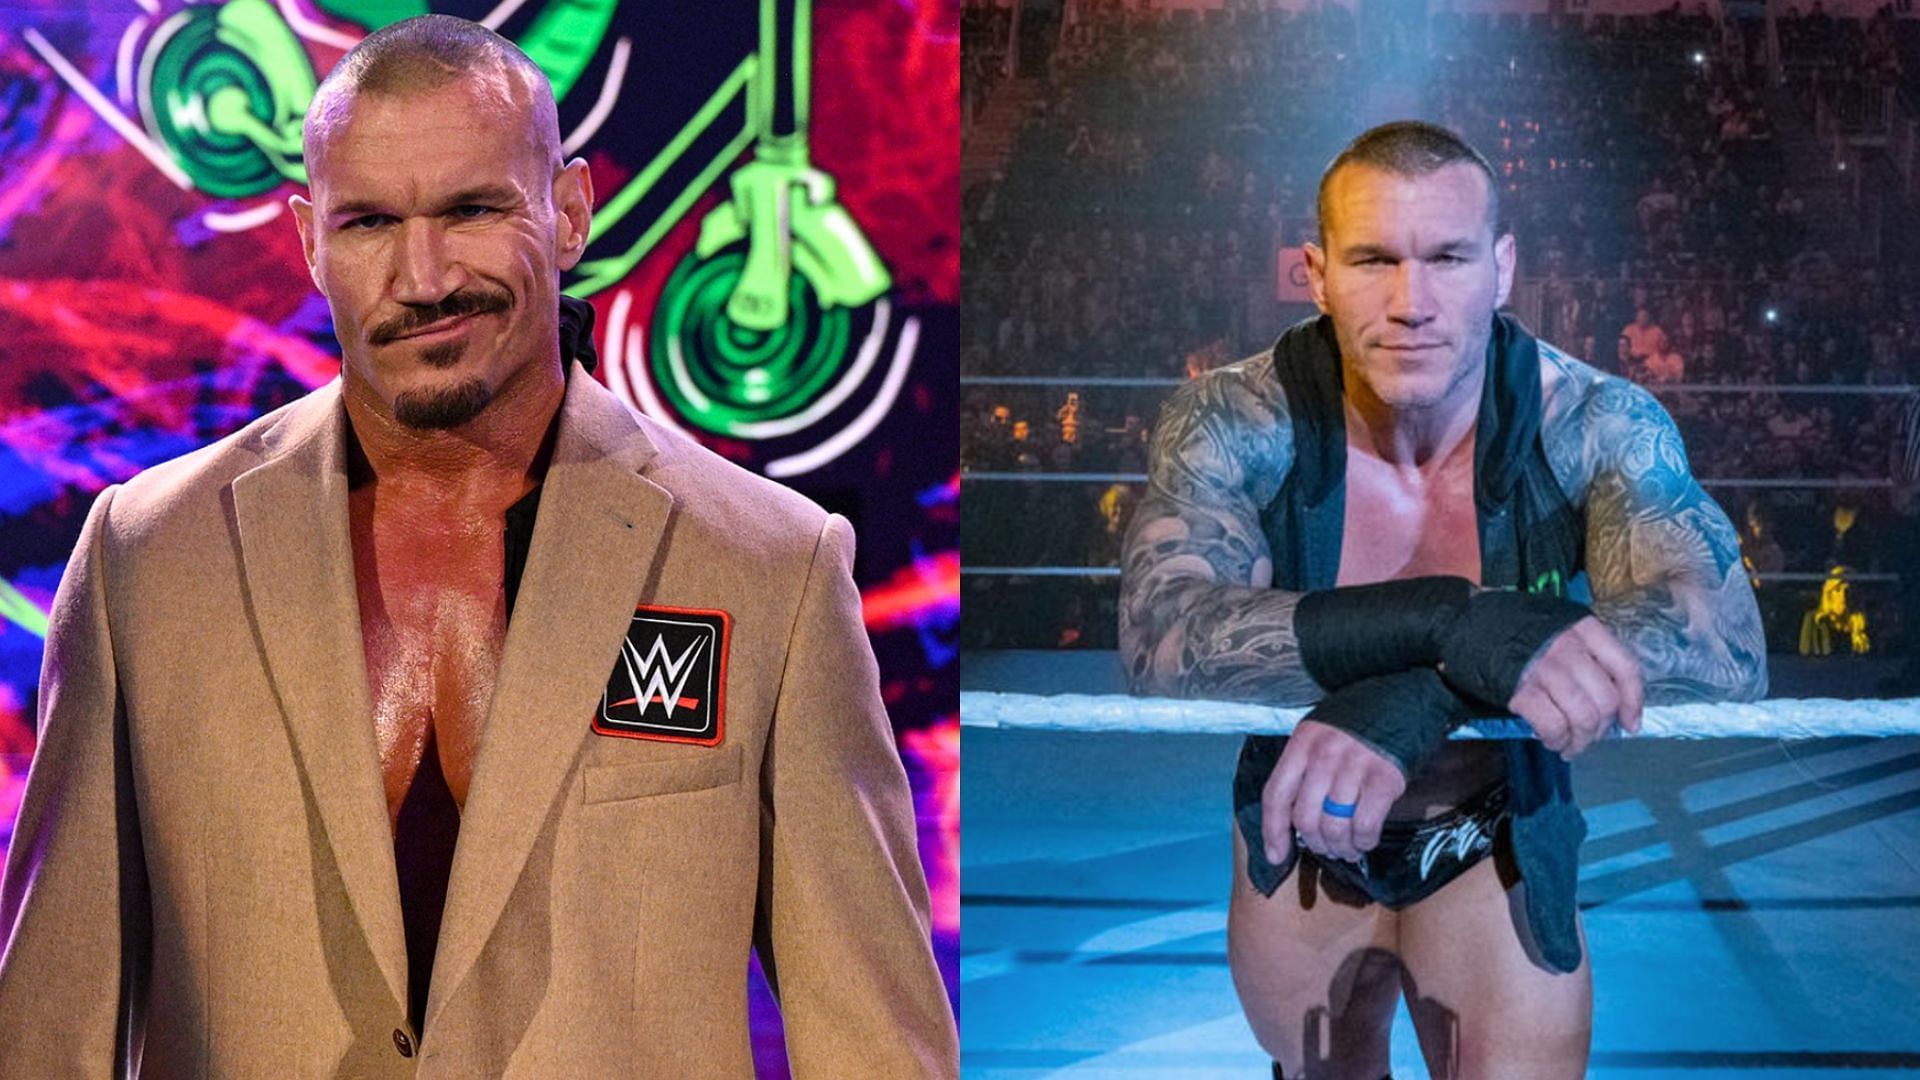 Randy Orton has been out of action since last year.